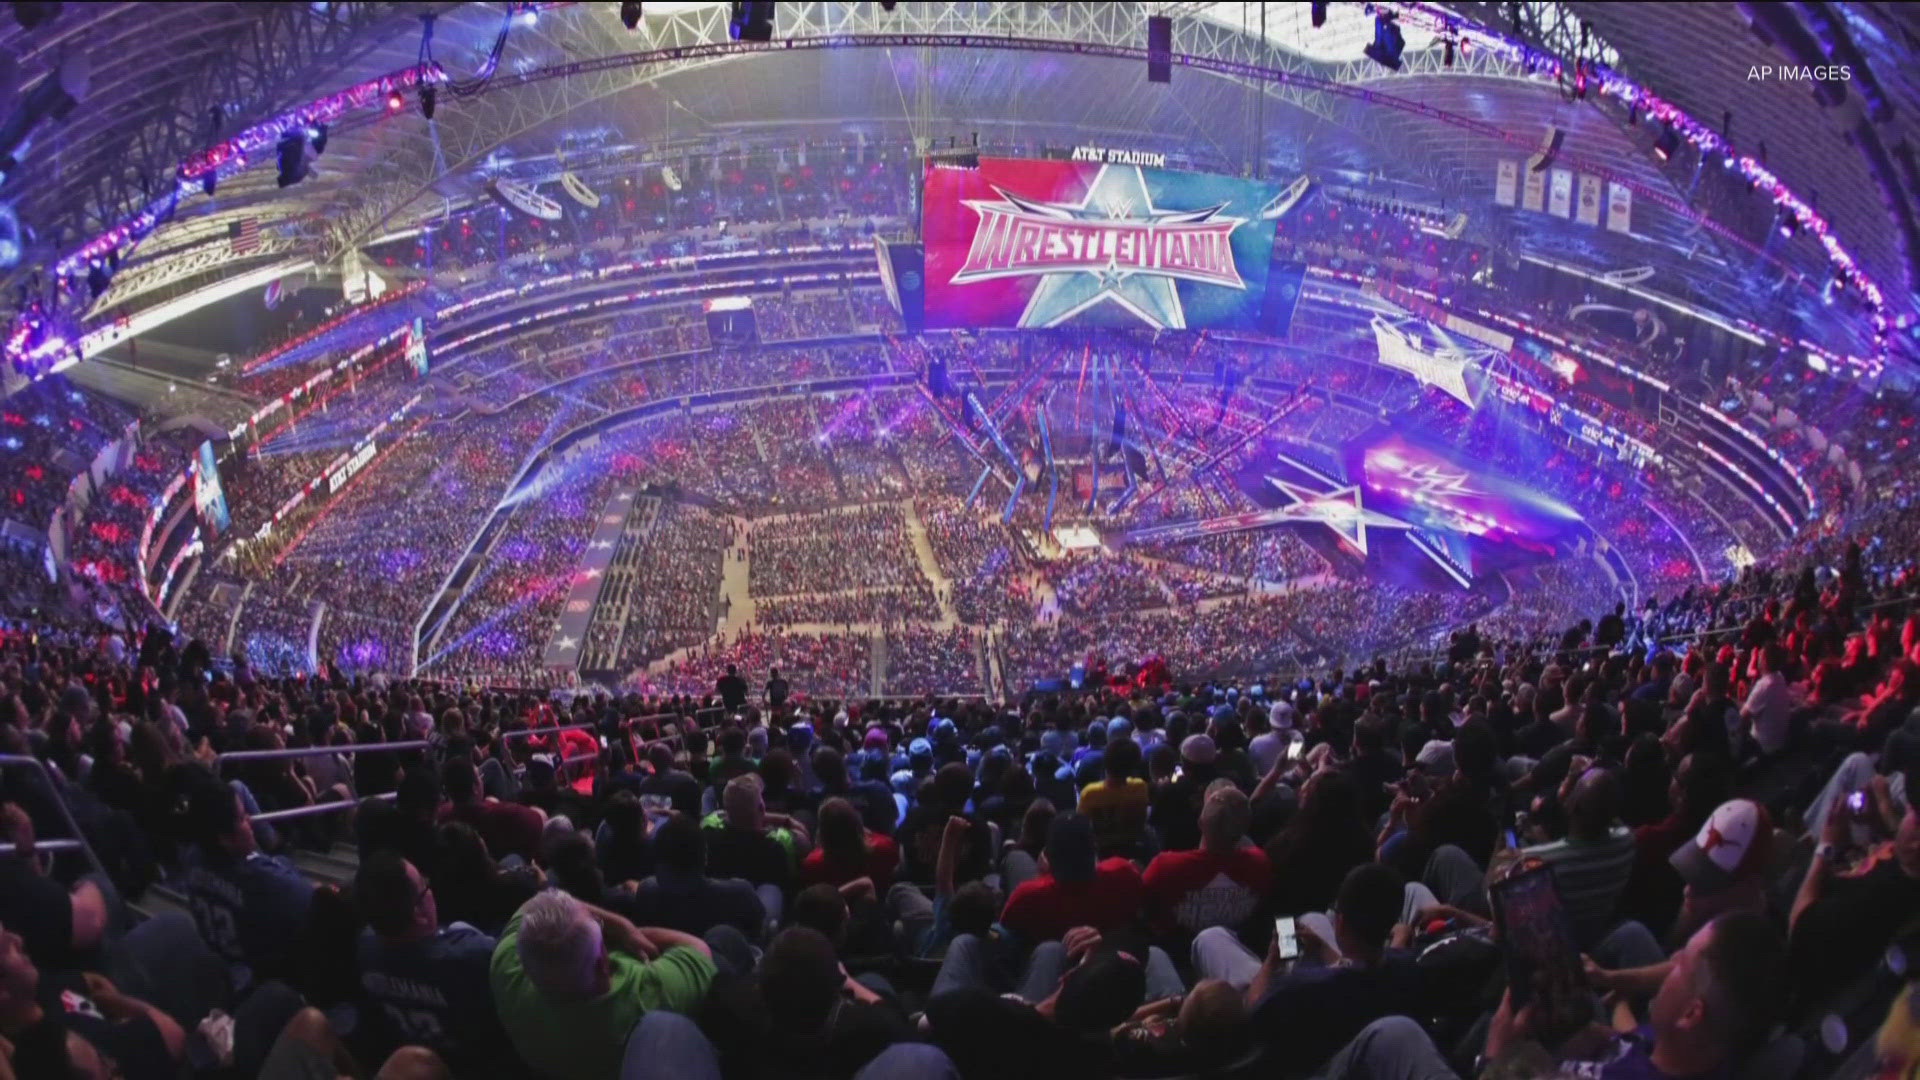 Minnesota Sports and Events, which bid for the event, expects a decision from WWE in the next few weeks.